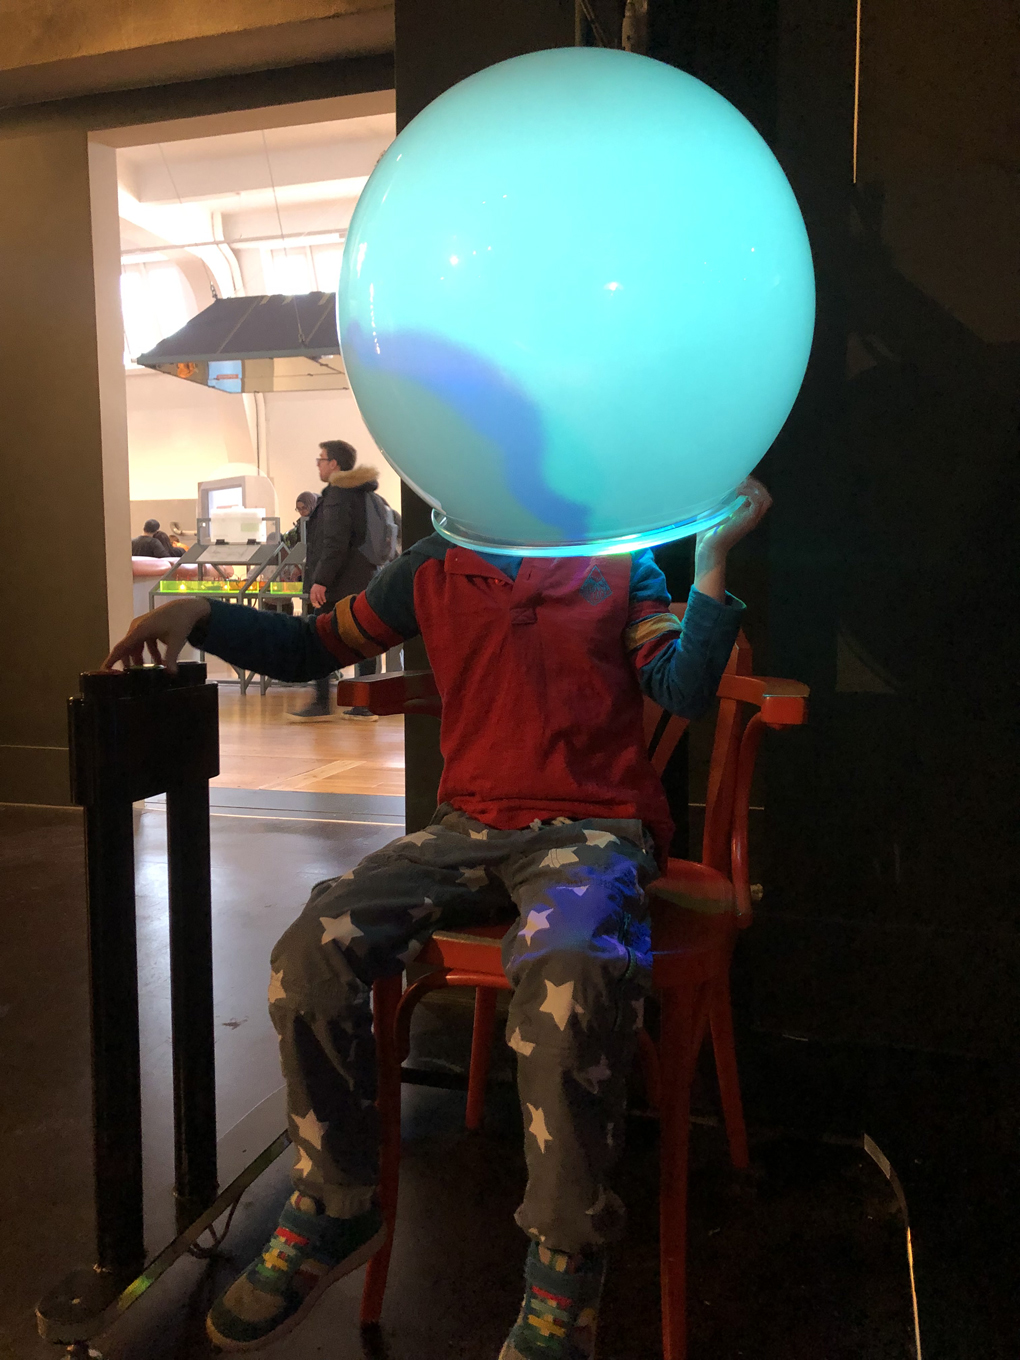 A young boy sitting on a chair in the Science Museum, with a big, opaque spherical helment over his head, emitting a soft blue glow.